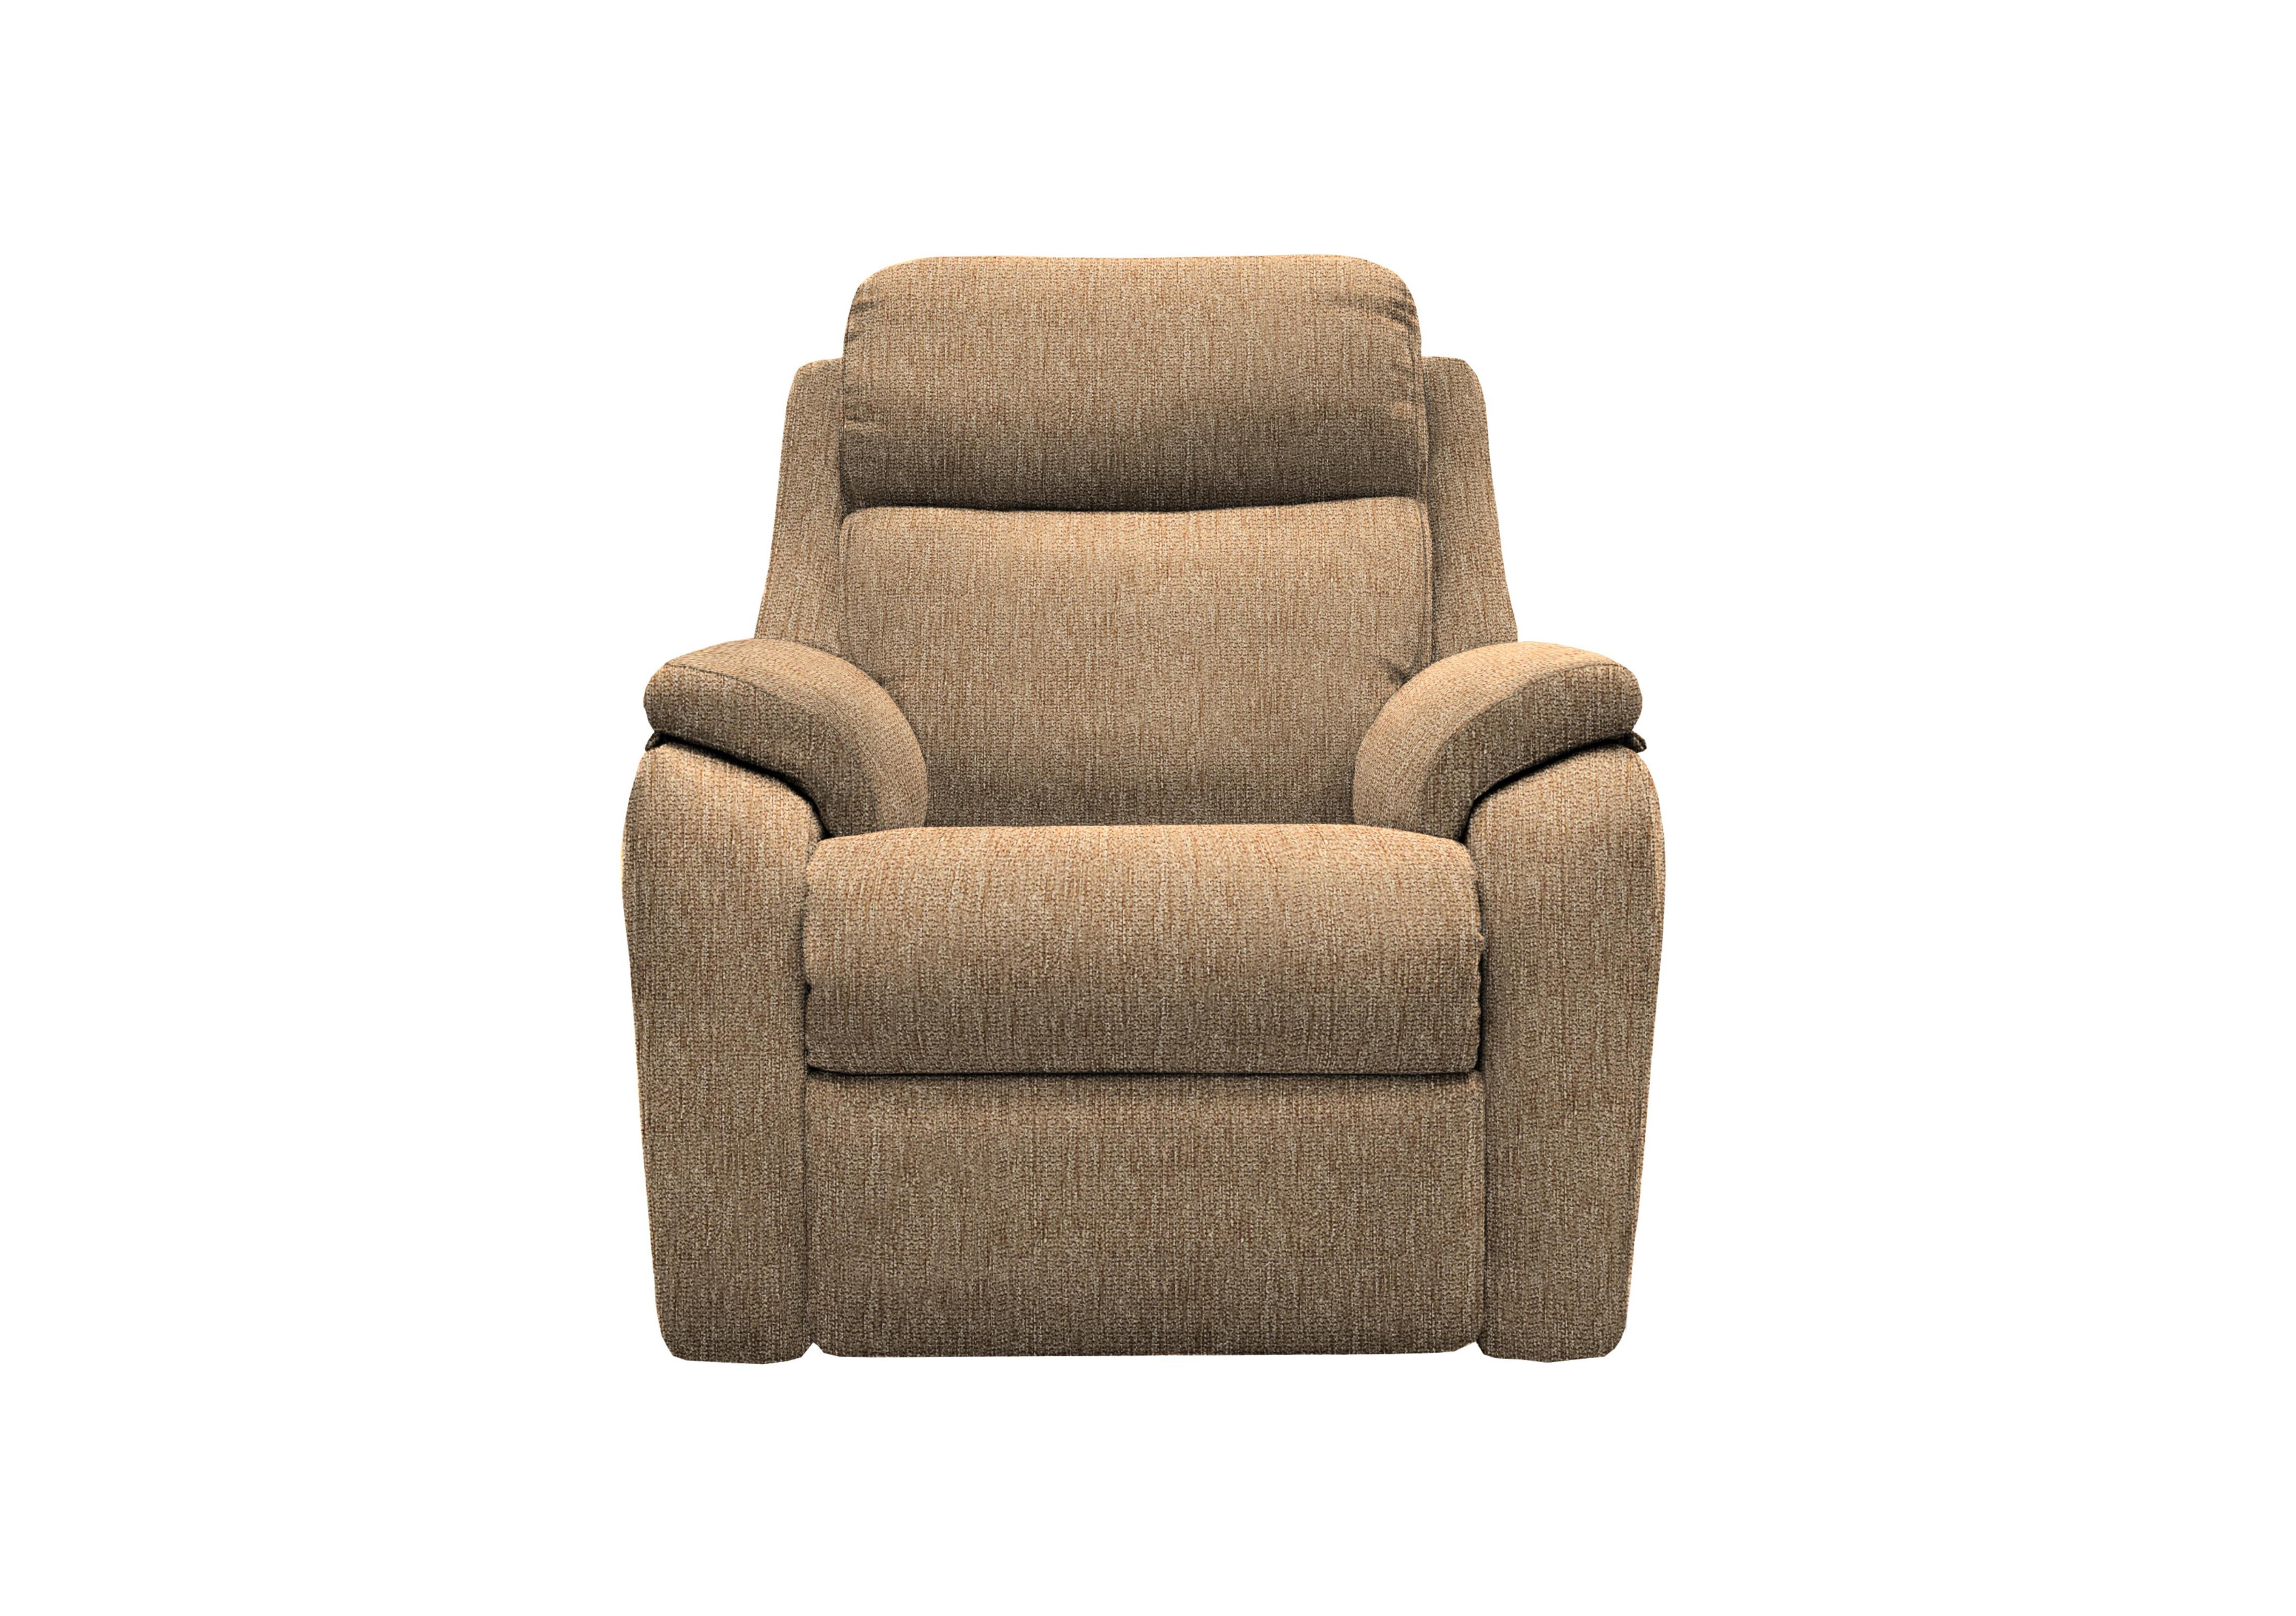 Kingsbury Fabric Armchair in A070 Boucle Cocoa on Furniture Village